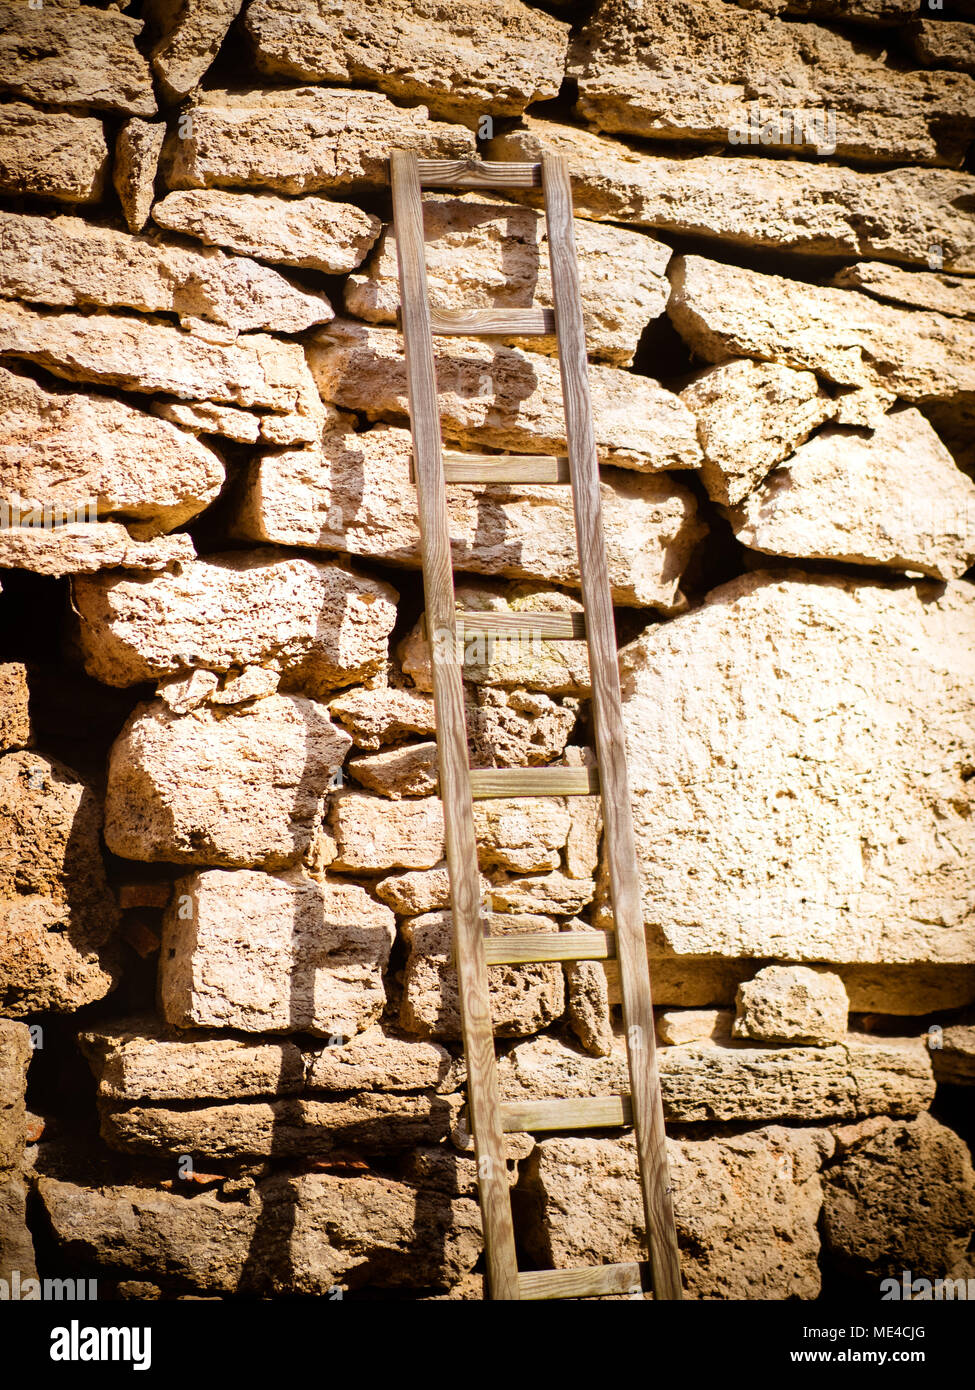 The wooden ladder on the stone wall Stock Photo